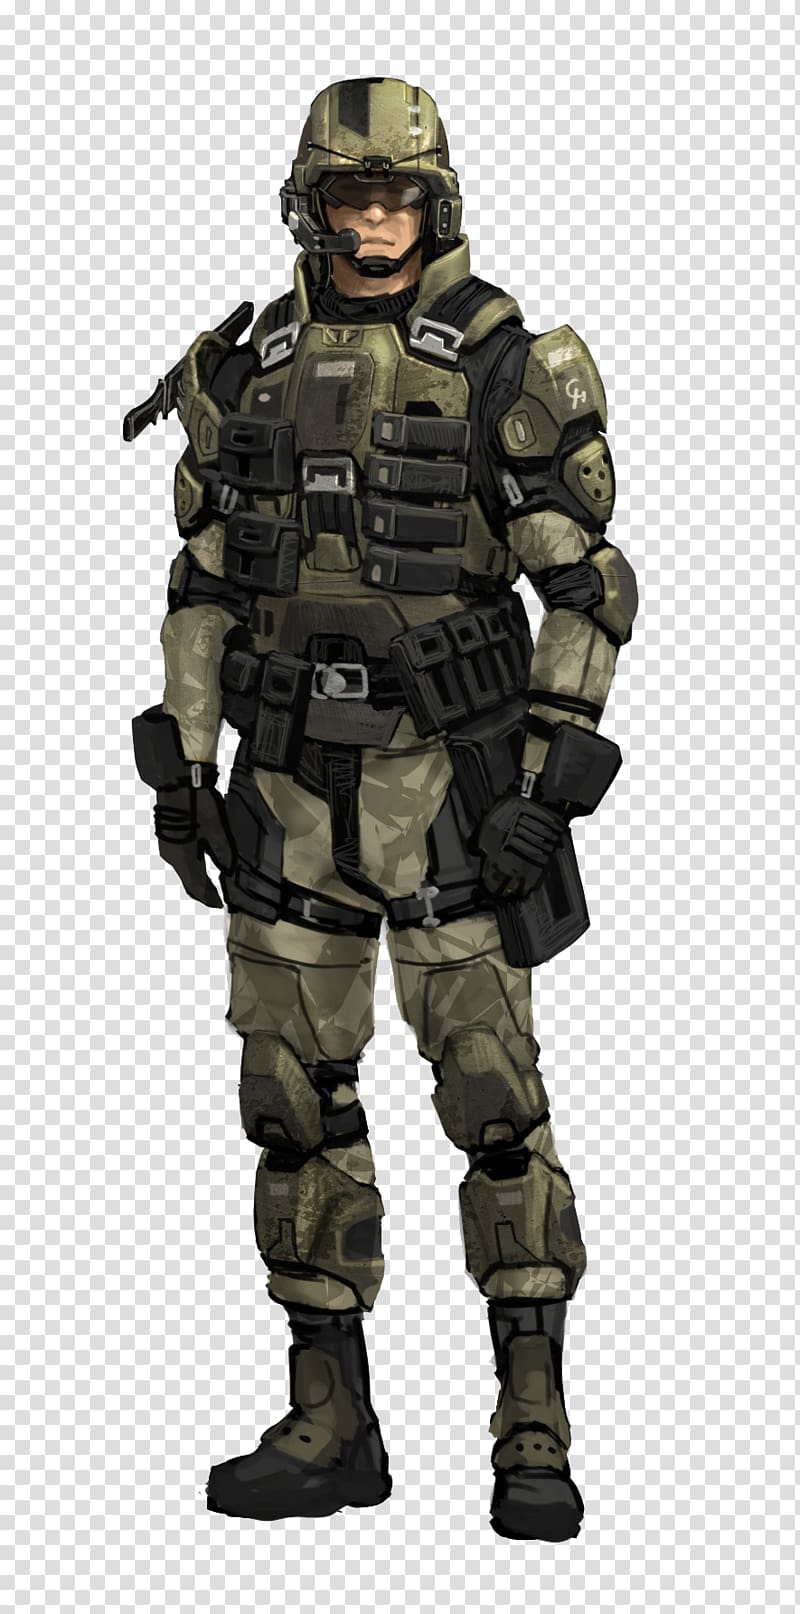 Halo 3 Halo: Reach Halo Wars Halo 5: Guardians Halo: Combat Evolved, Soldier transparent background PNG clipart